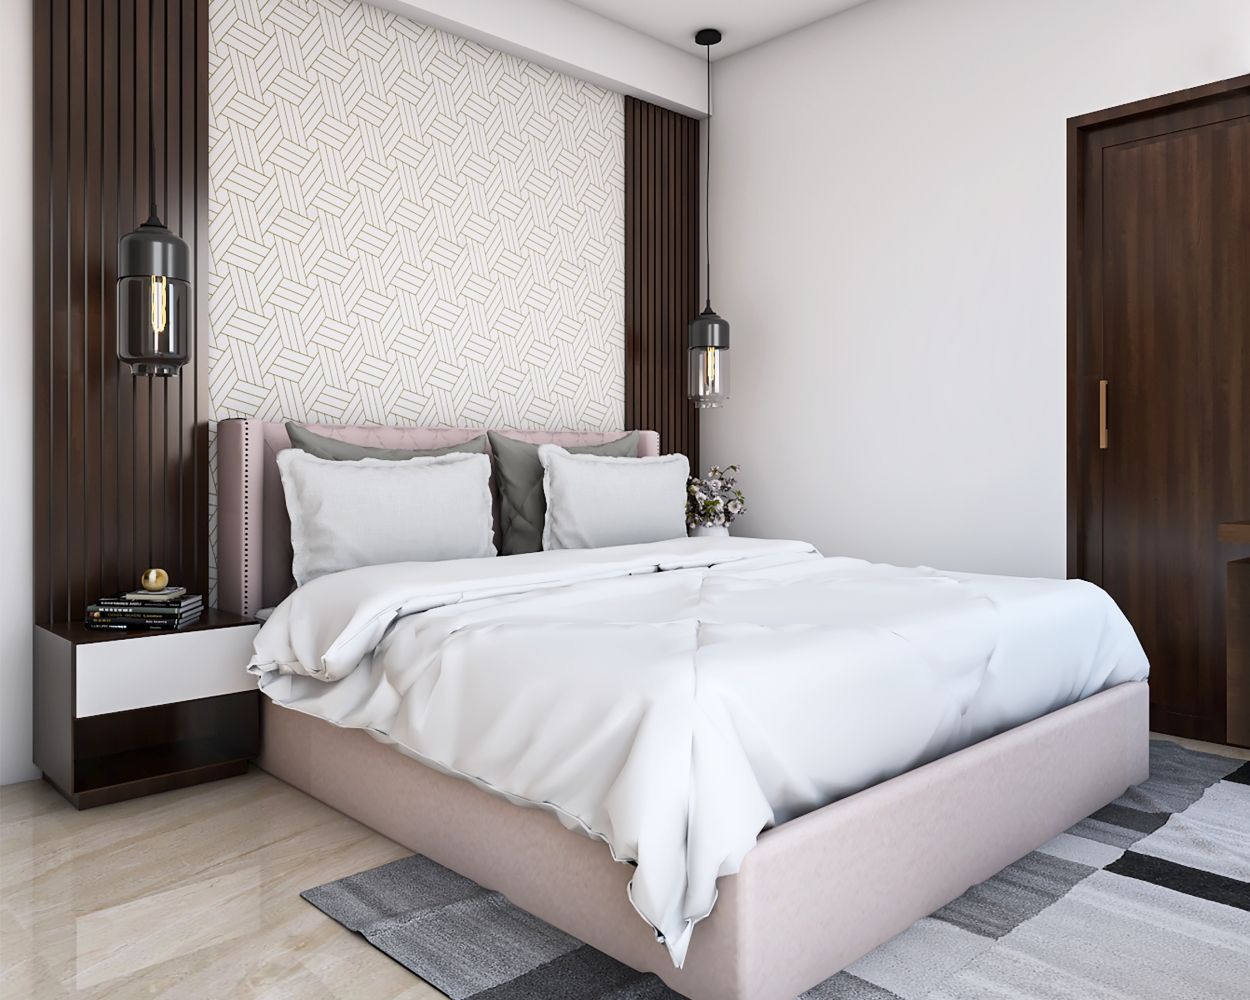 Modern Bedroom Wall Design With Geometric Wallpaper And Wooden Wall Panelling